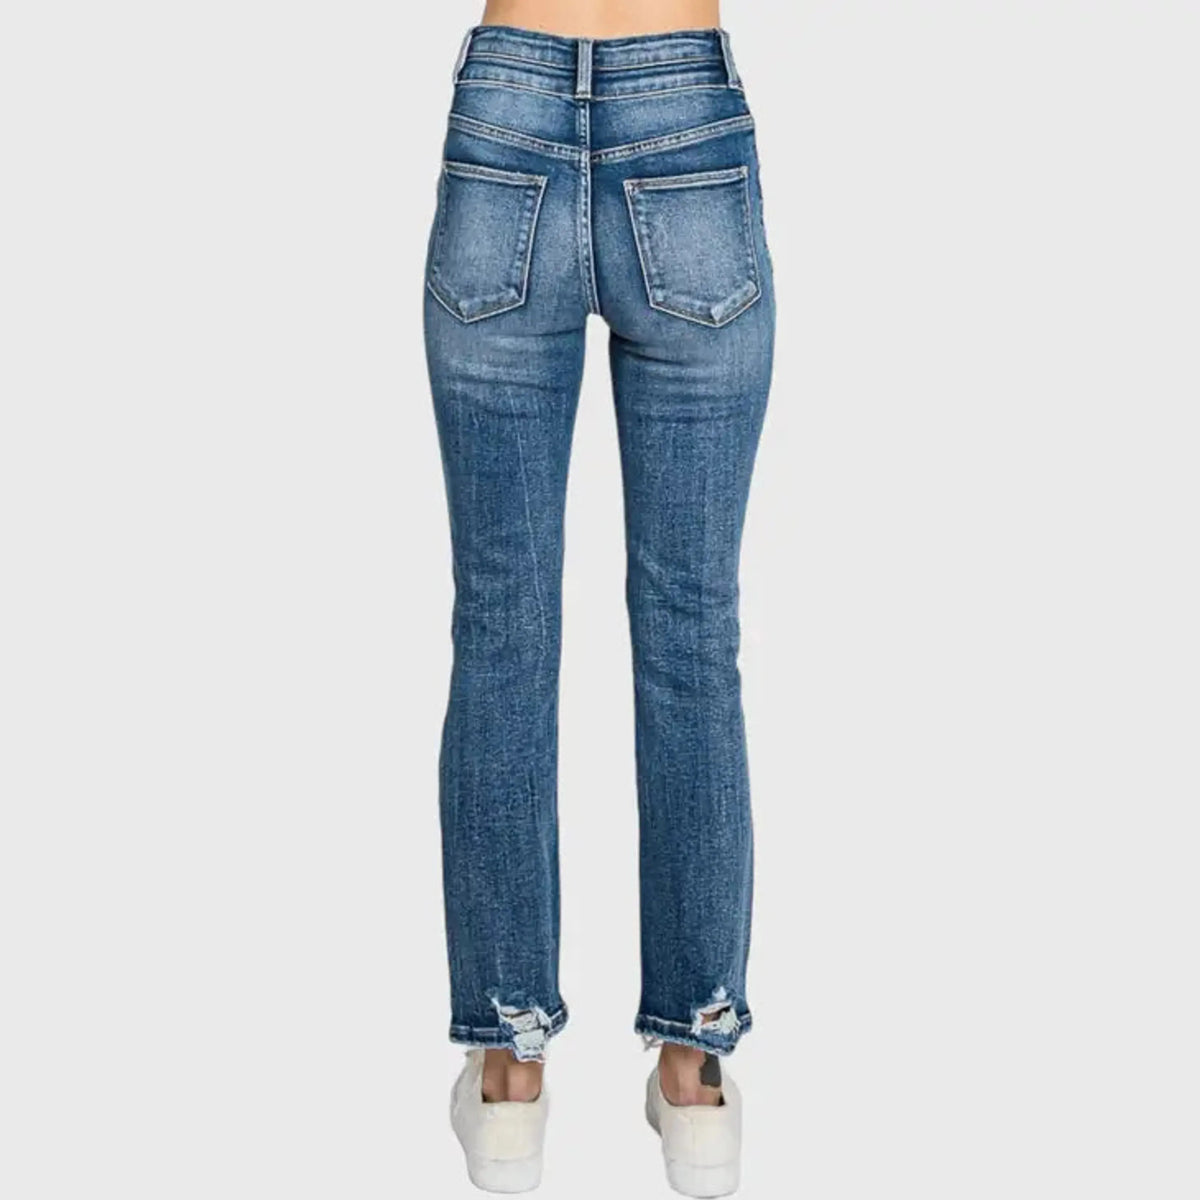 Saydie Stretch High Rise straight Jean